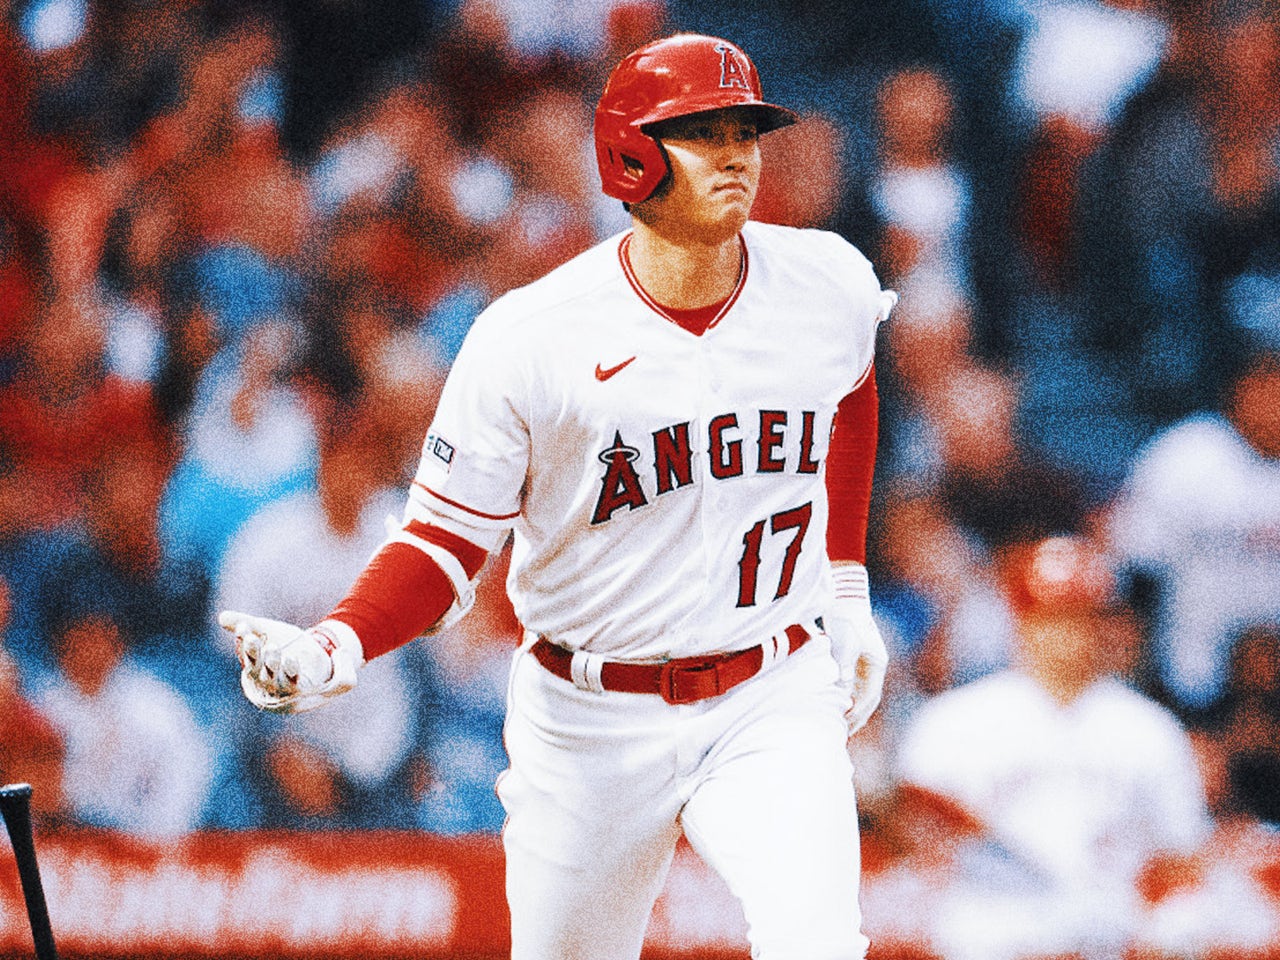 In Photos: Shohei Ohtani spotted sporting unreleased kicks